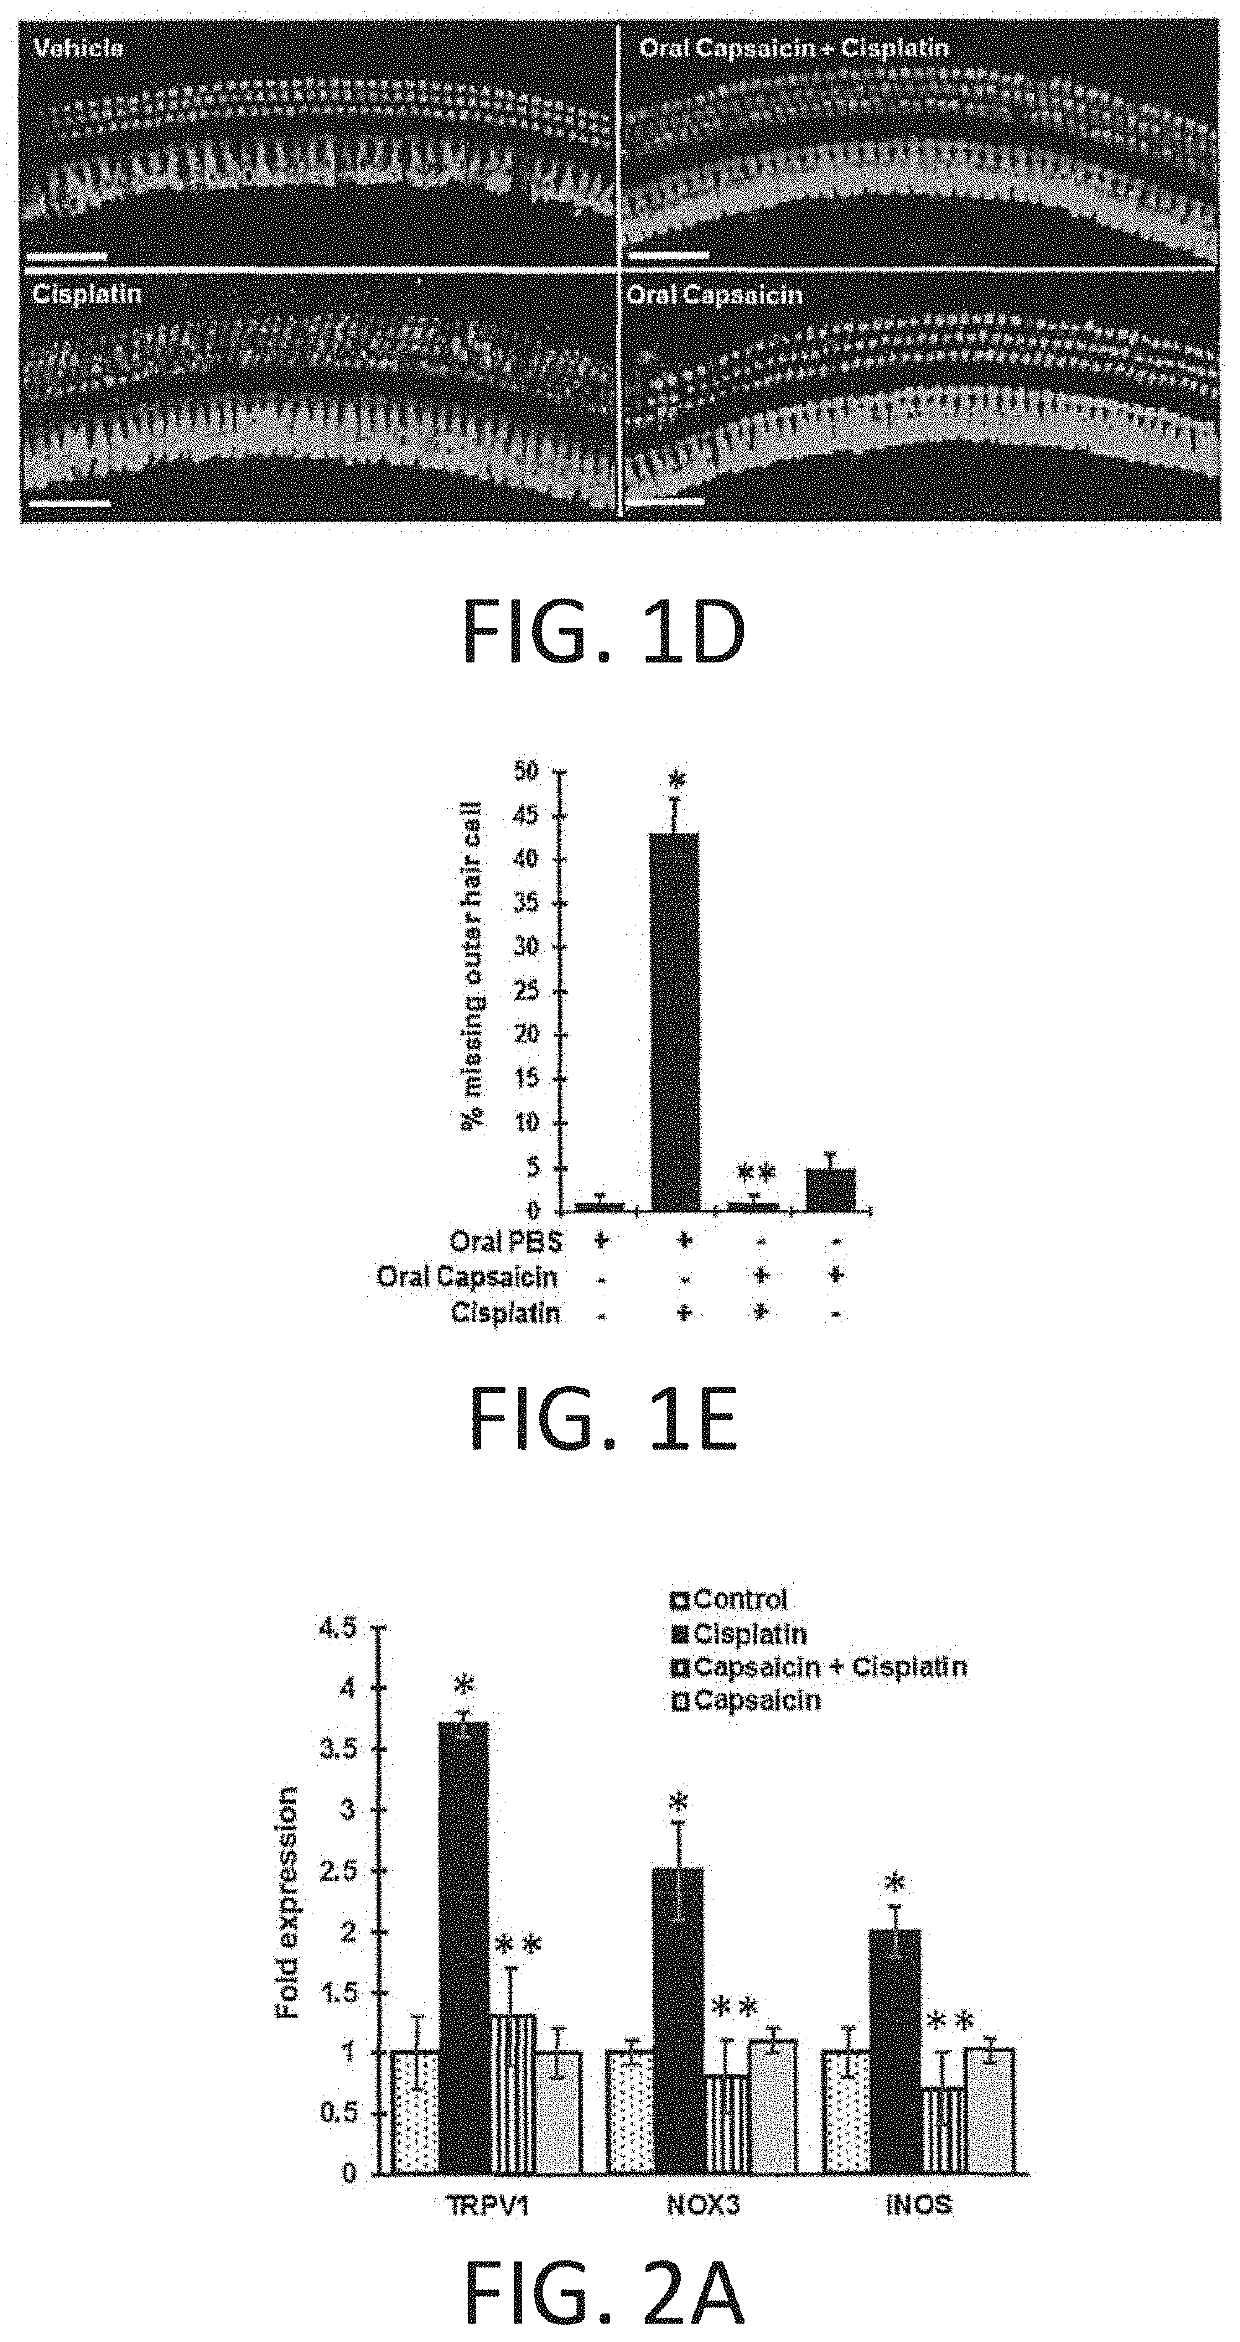 REGIMENS, COMPOSITIONS AND METHODS WITH CAPSAICIN AND TNF-alpha INHIBITOR